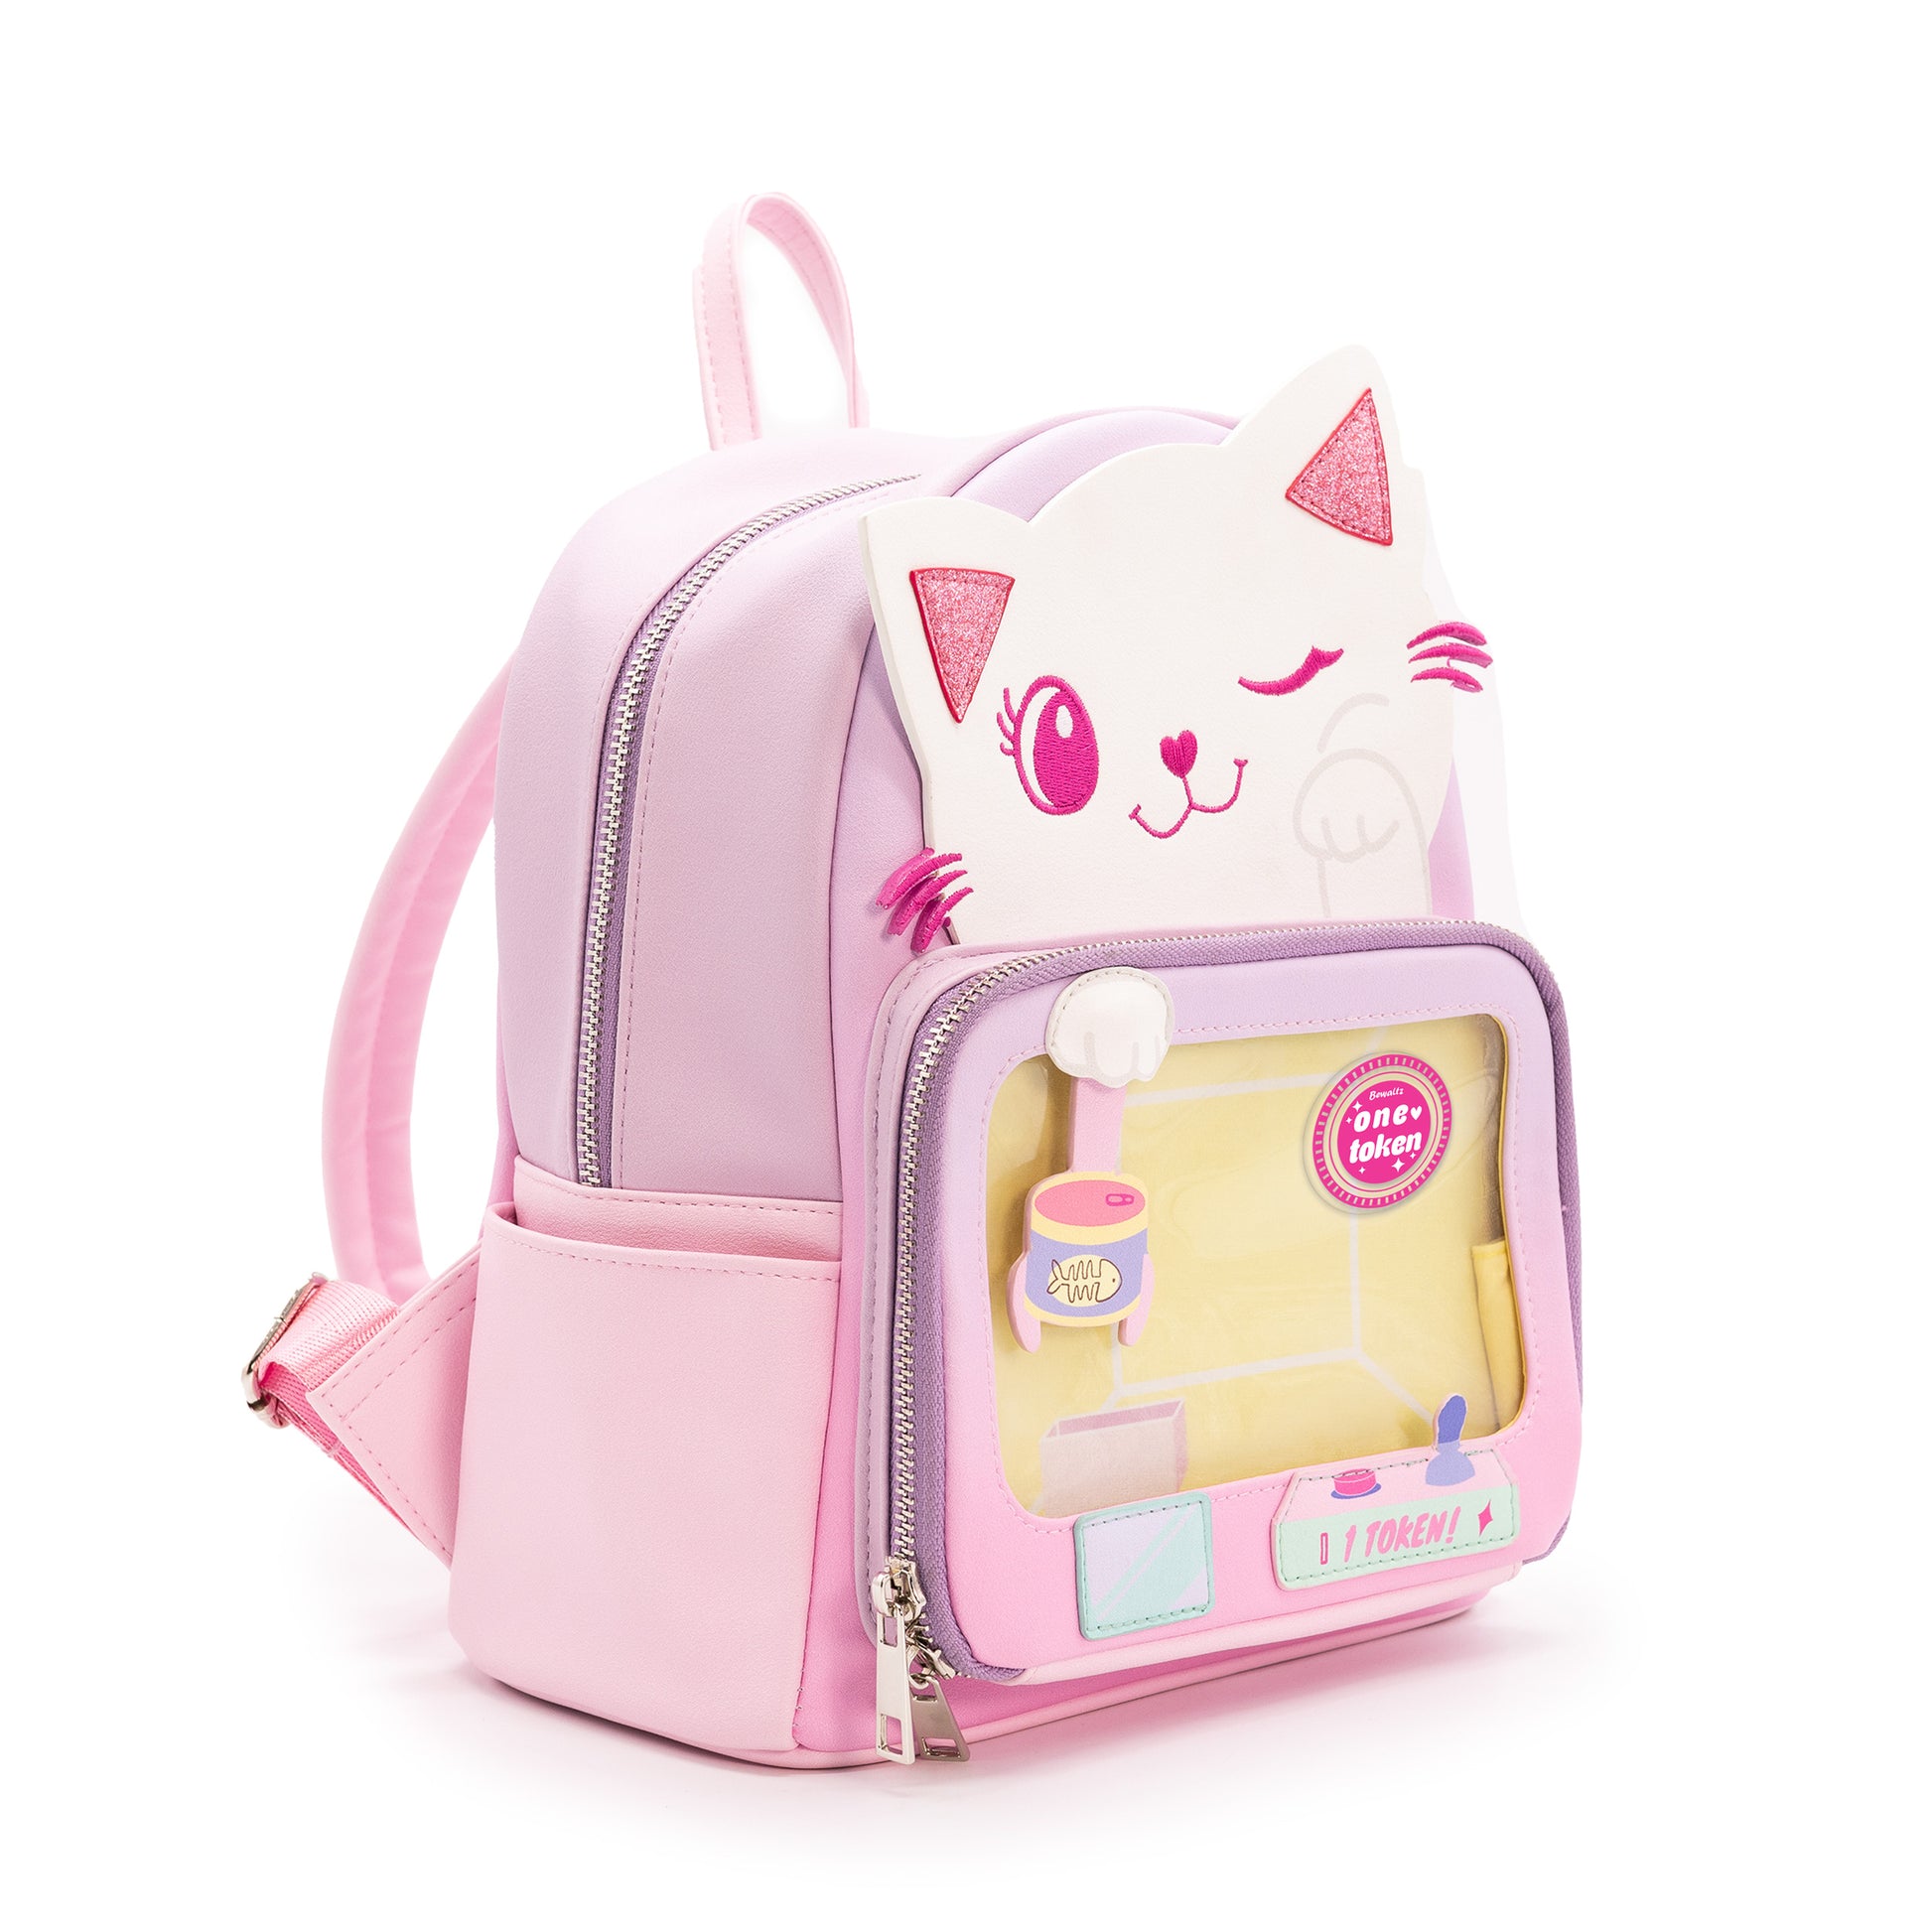 Bewaltz Claw Machine Pin Collector Backpack - Friendly Kitty